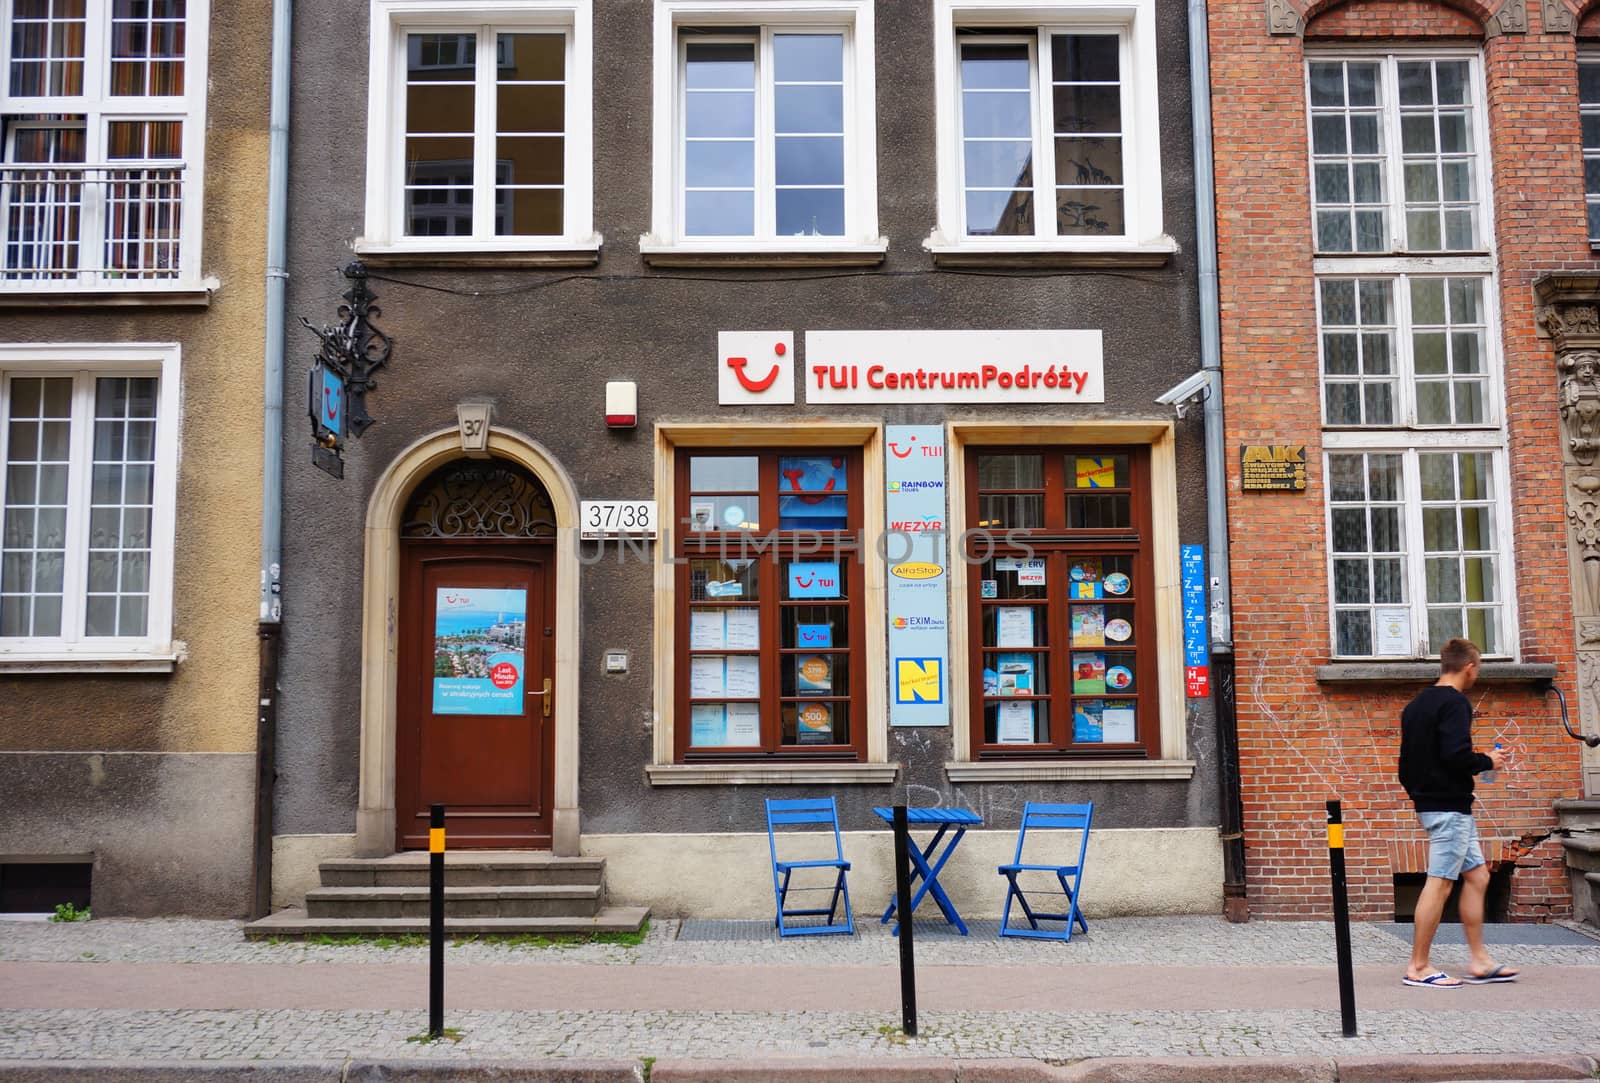 GDANSK, POLAND - JULY 29, 2015: Building front of a TUI travel agency